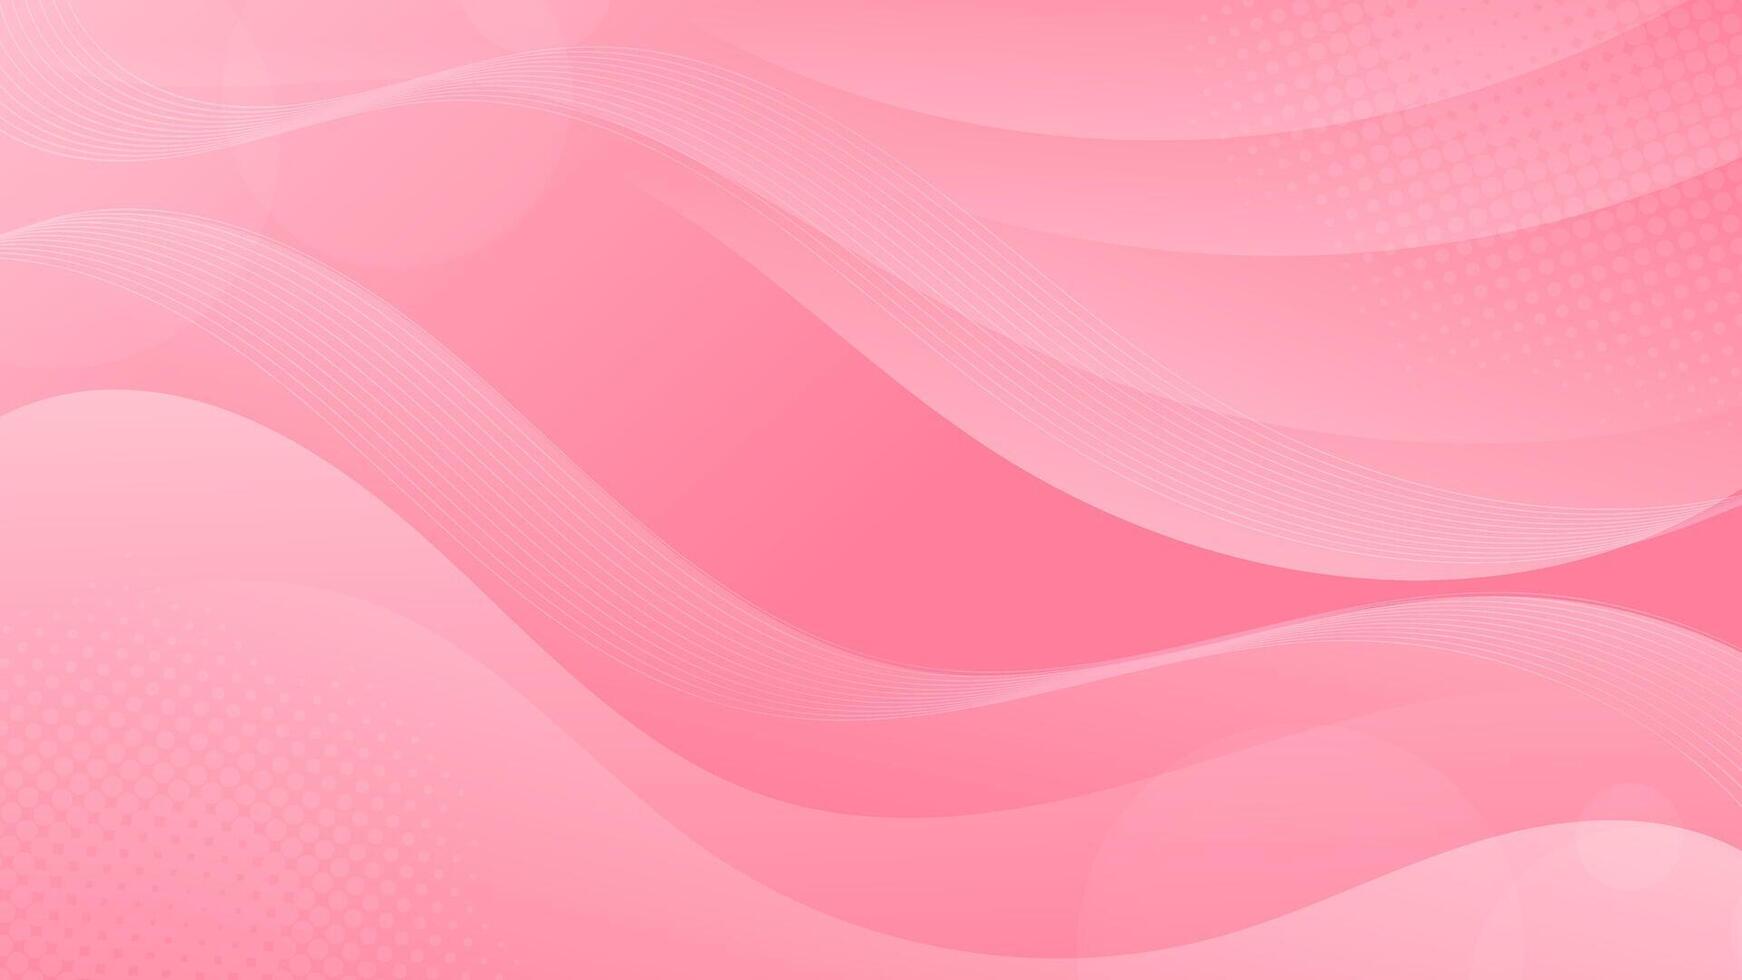 Abstract Pink Background with Wavy Shapes. flowing and curvy shapes. This asset is suitable for website backgrounds, flyers, posters, and digital art projects. vector